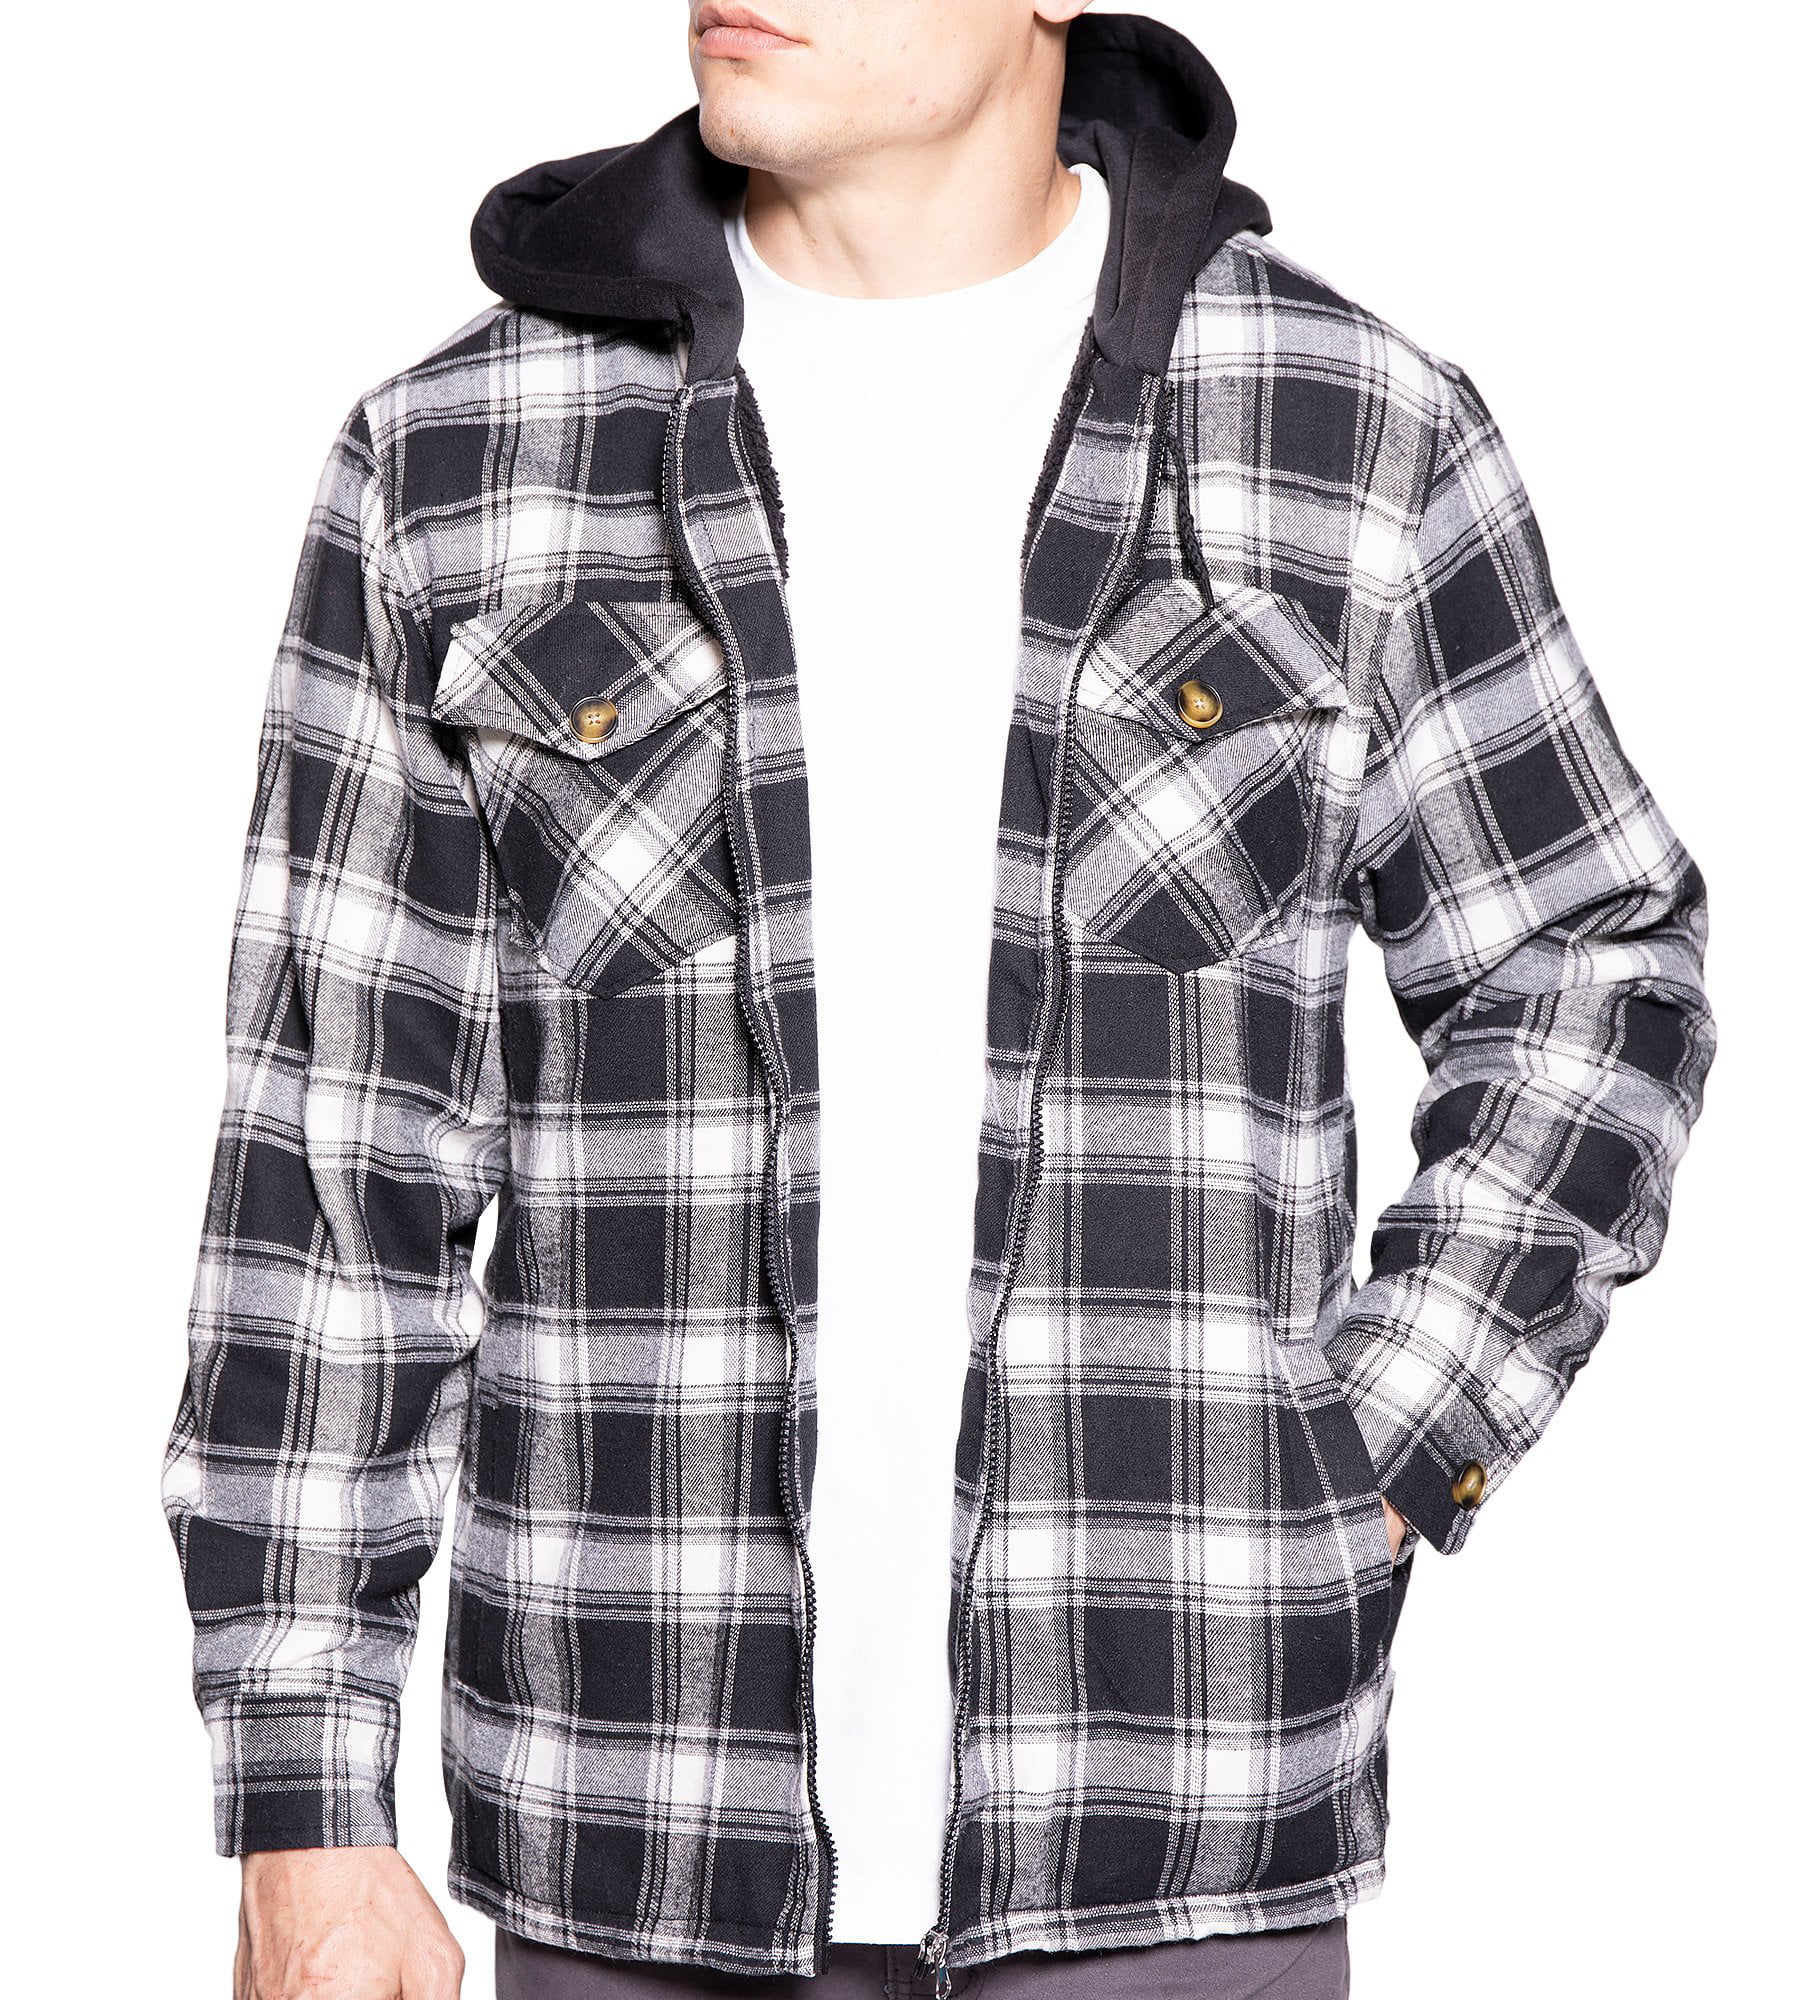 5XL Visive Mens Heavy Flannel Shirt Jacket for Mens Big and Tall Zip Up Fleece W/Hood Size M